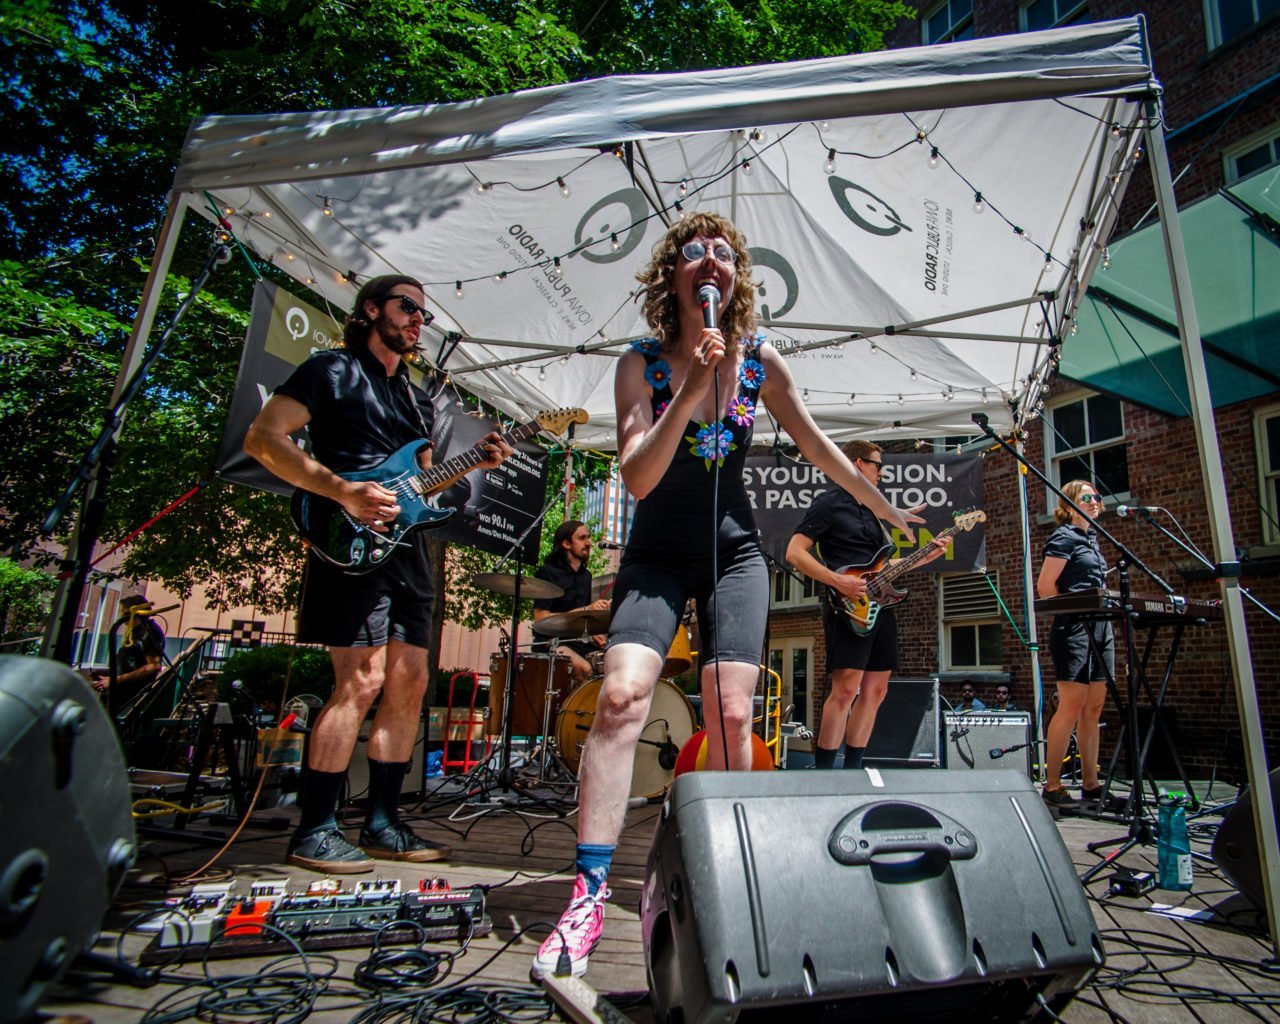 Ramona and the Sometimes performing on the Iowa Public Radio stage at 80/35 Music Festival 2018 in Des Moines, Iowa